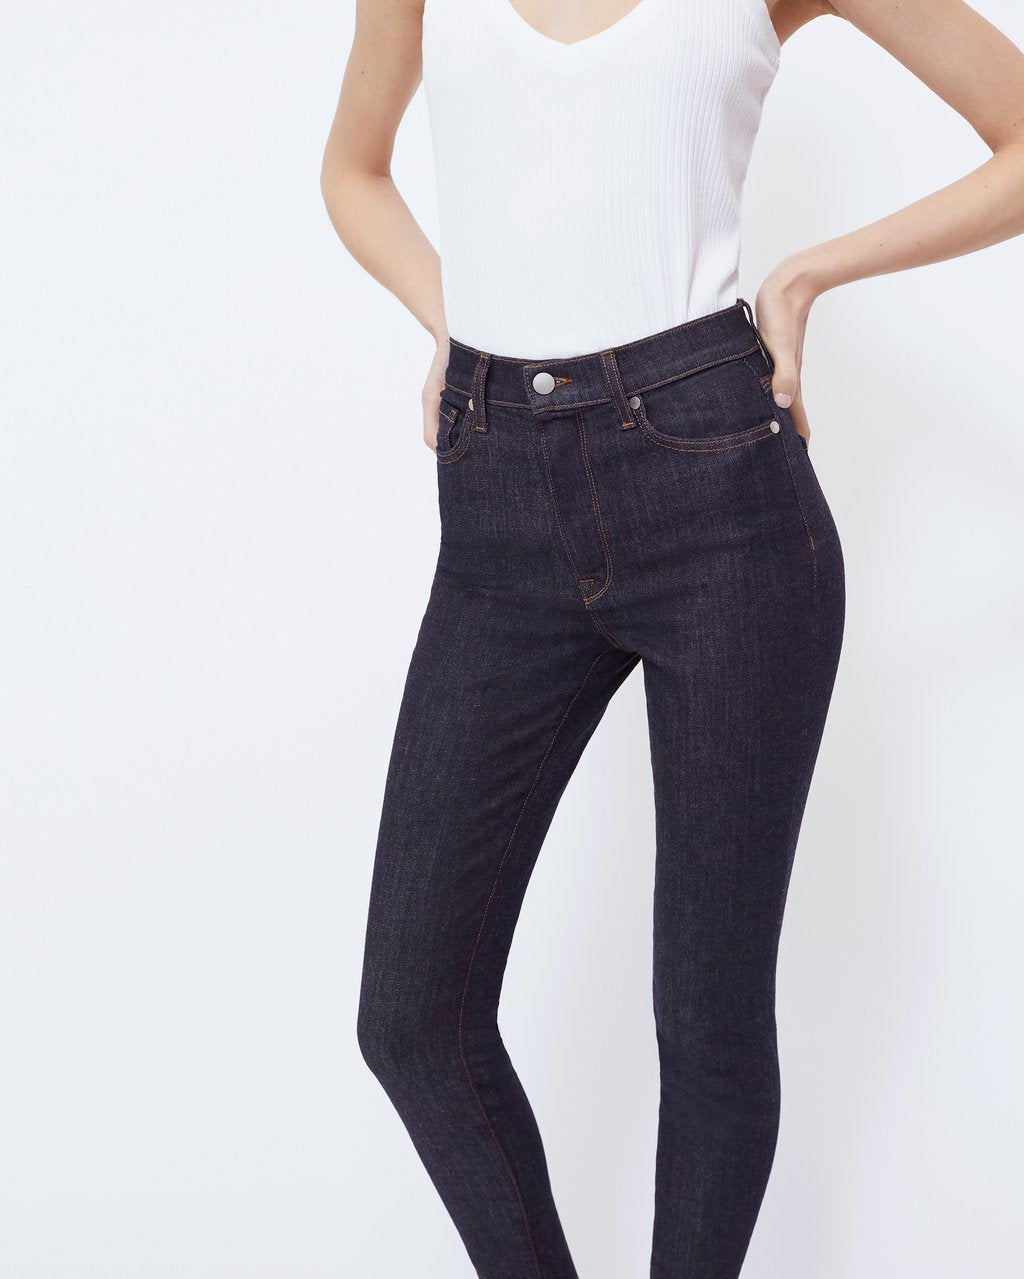 BLDWN THE ULTRA HIGH RISE SKINNY JEAN IN ABYSS- BLACK